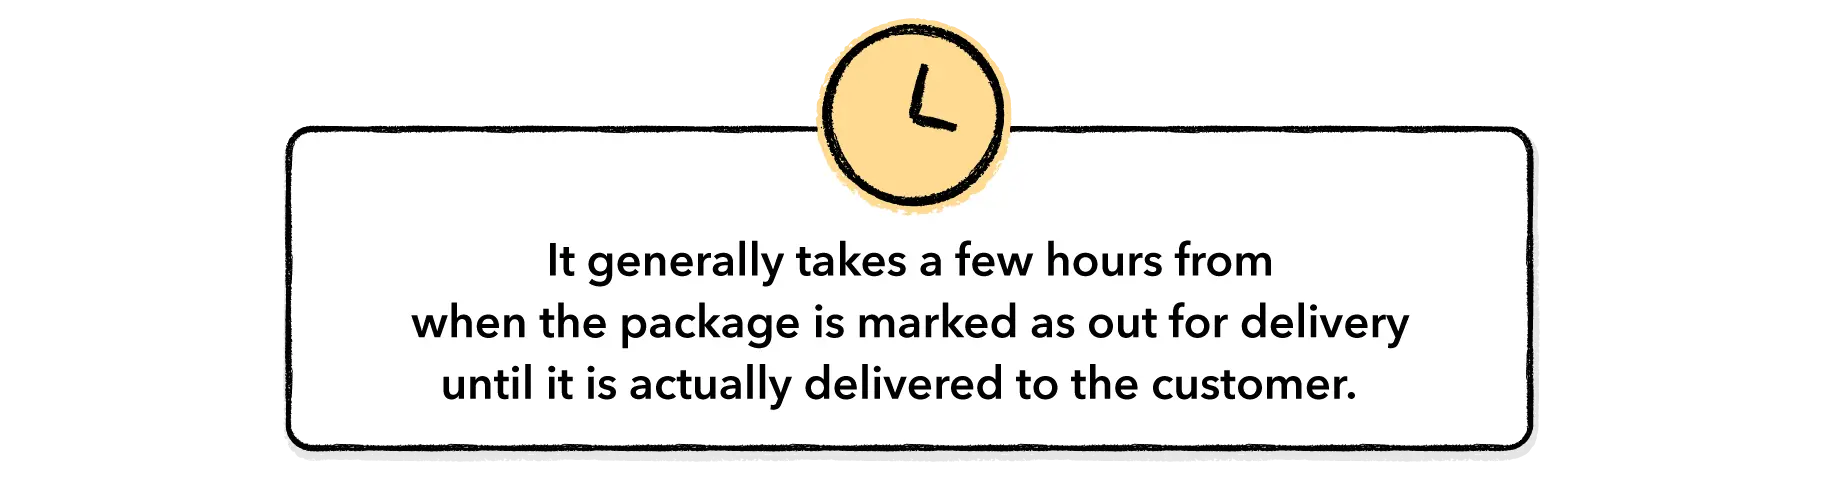 delivery time for packages with out for delivery status